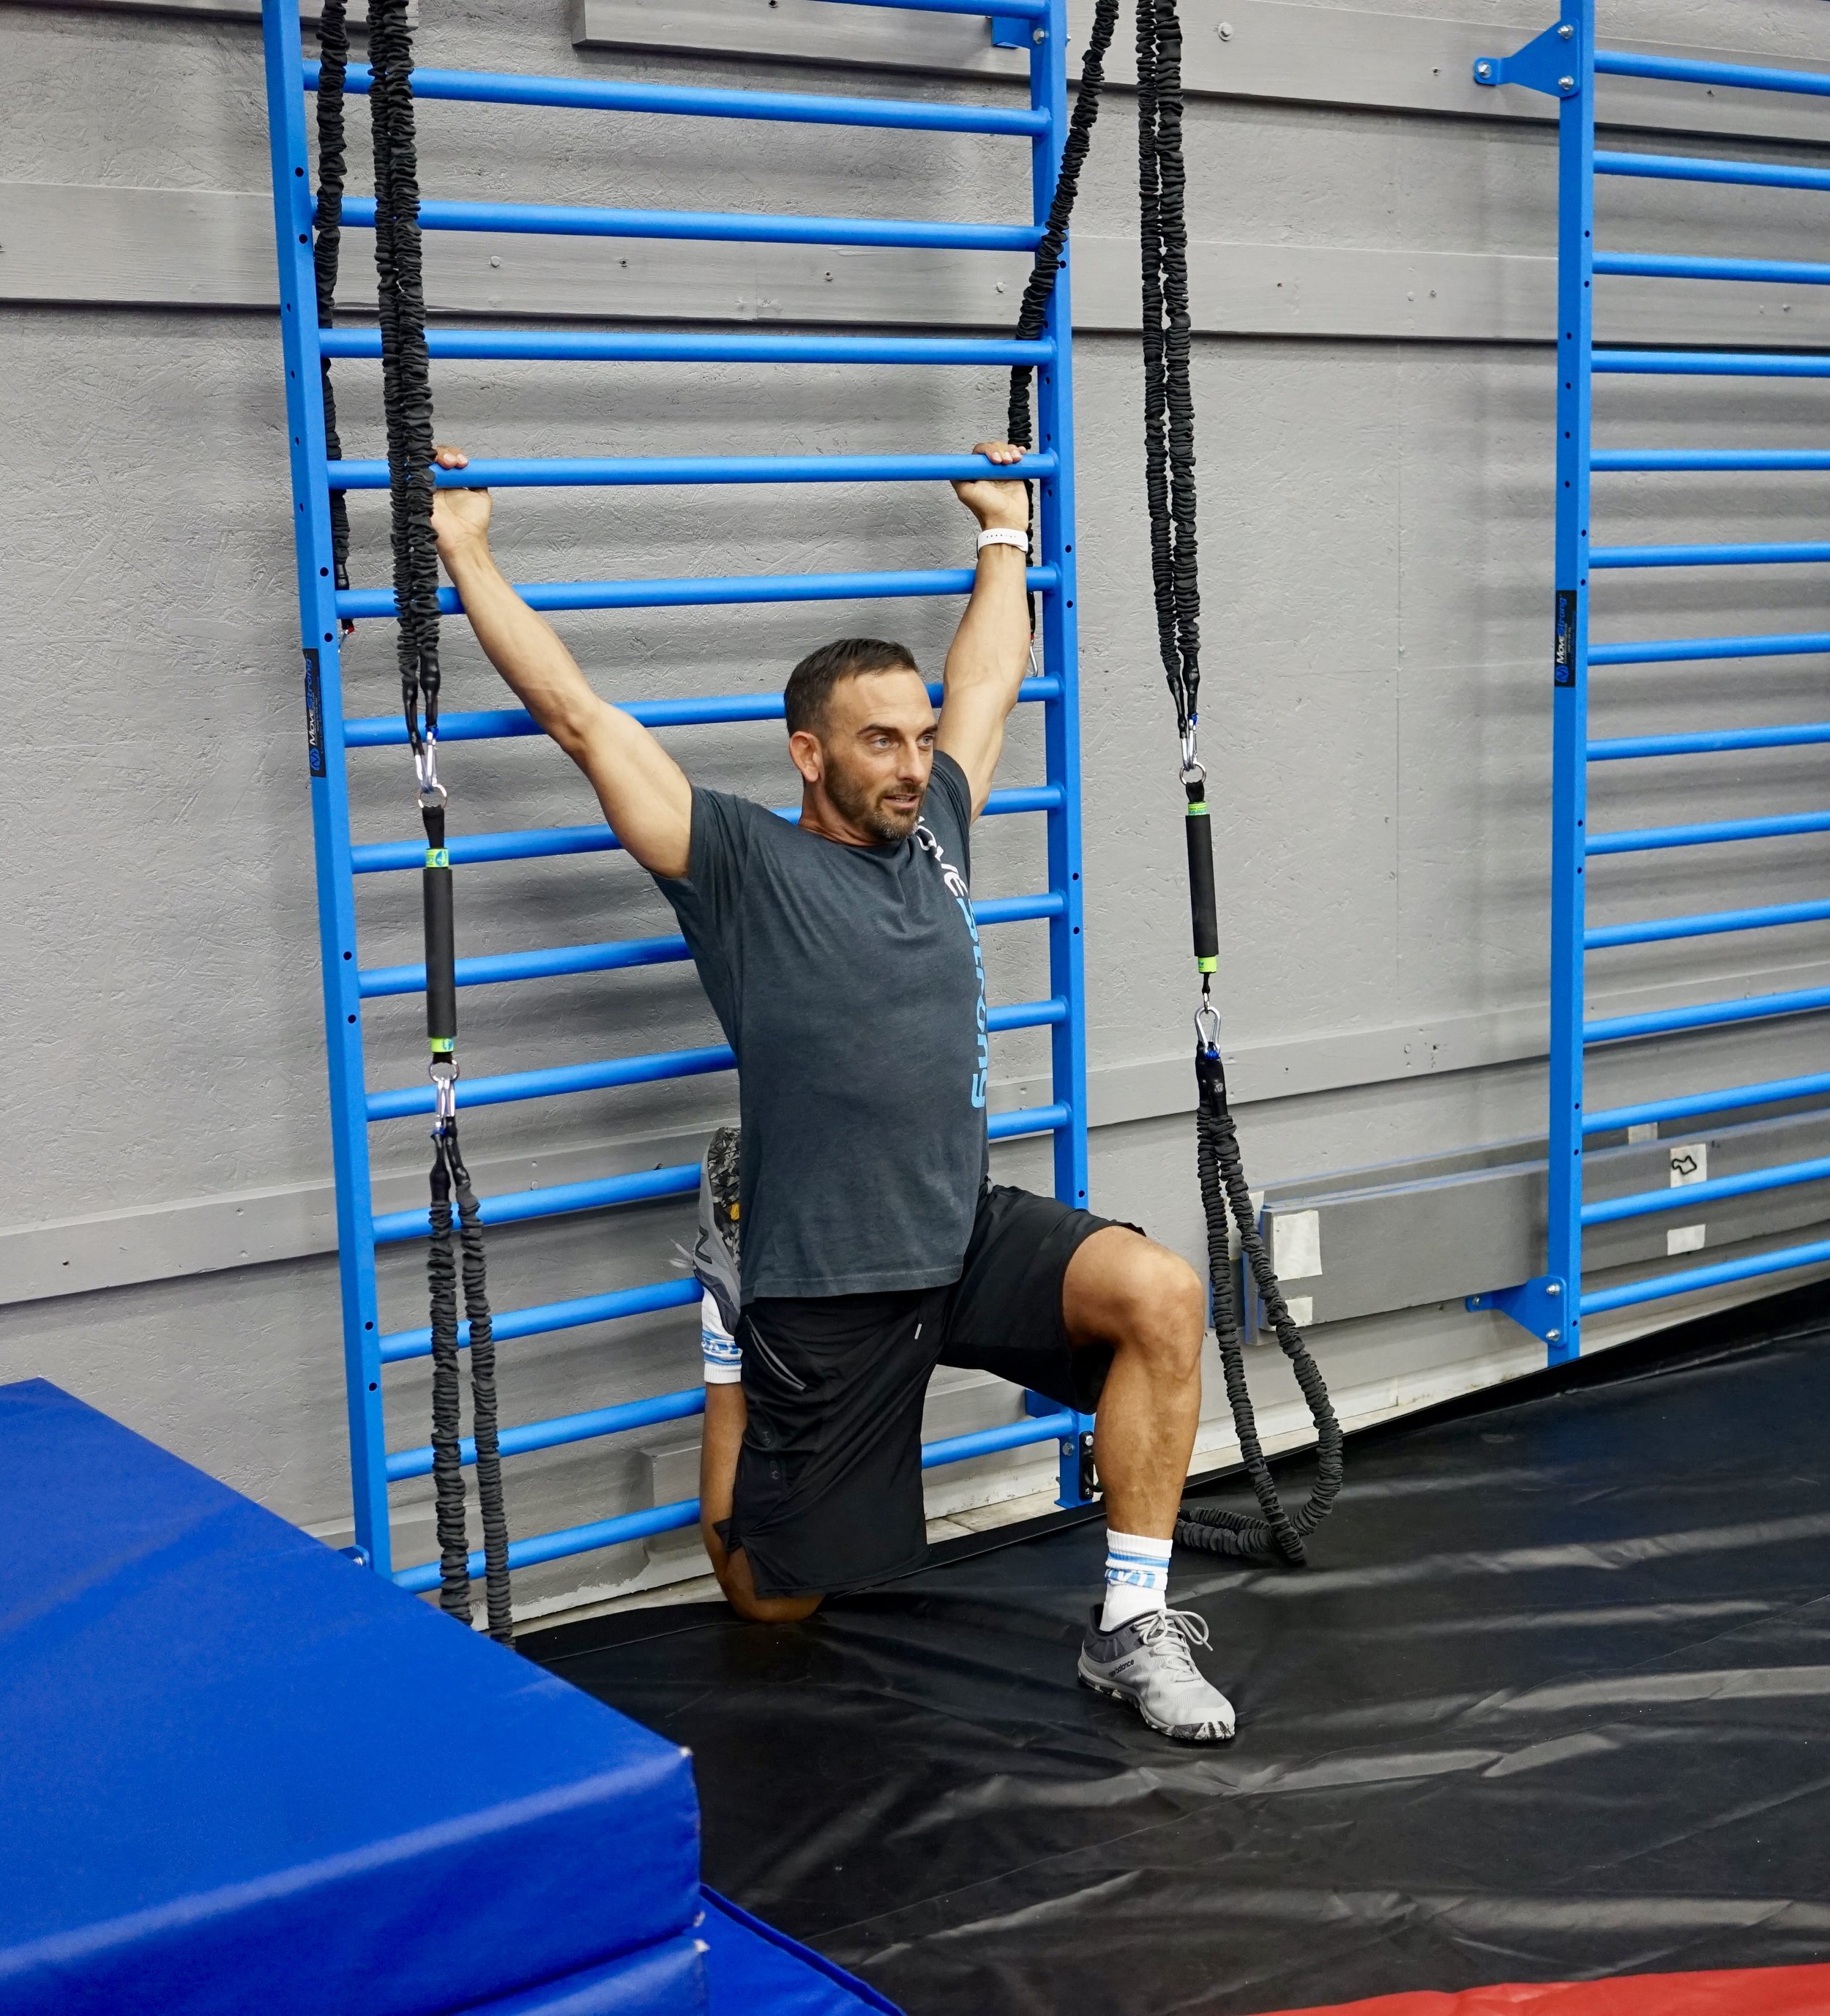 Stall Bars for mobility stretching